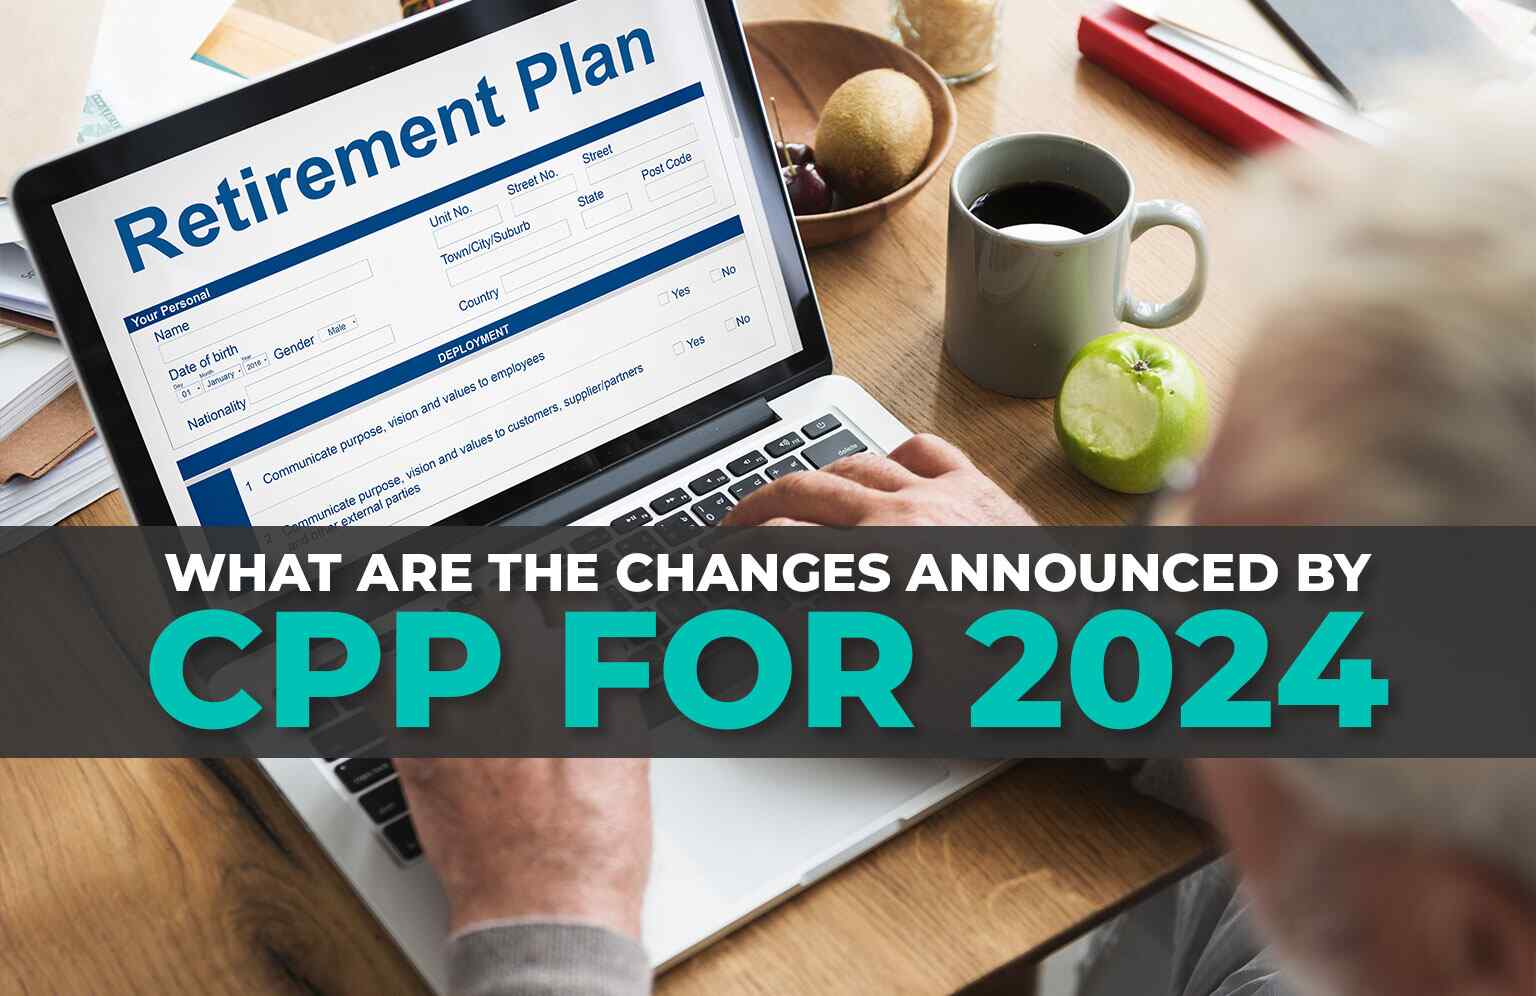 Changes Announced by CPP for 2024